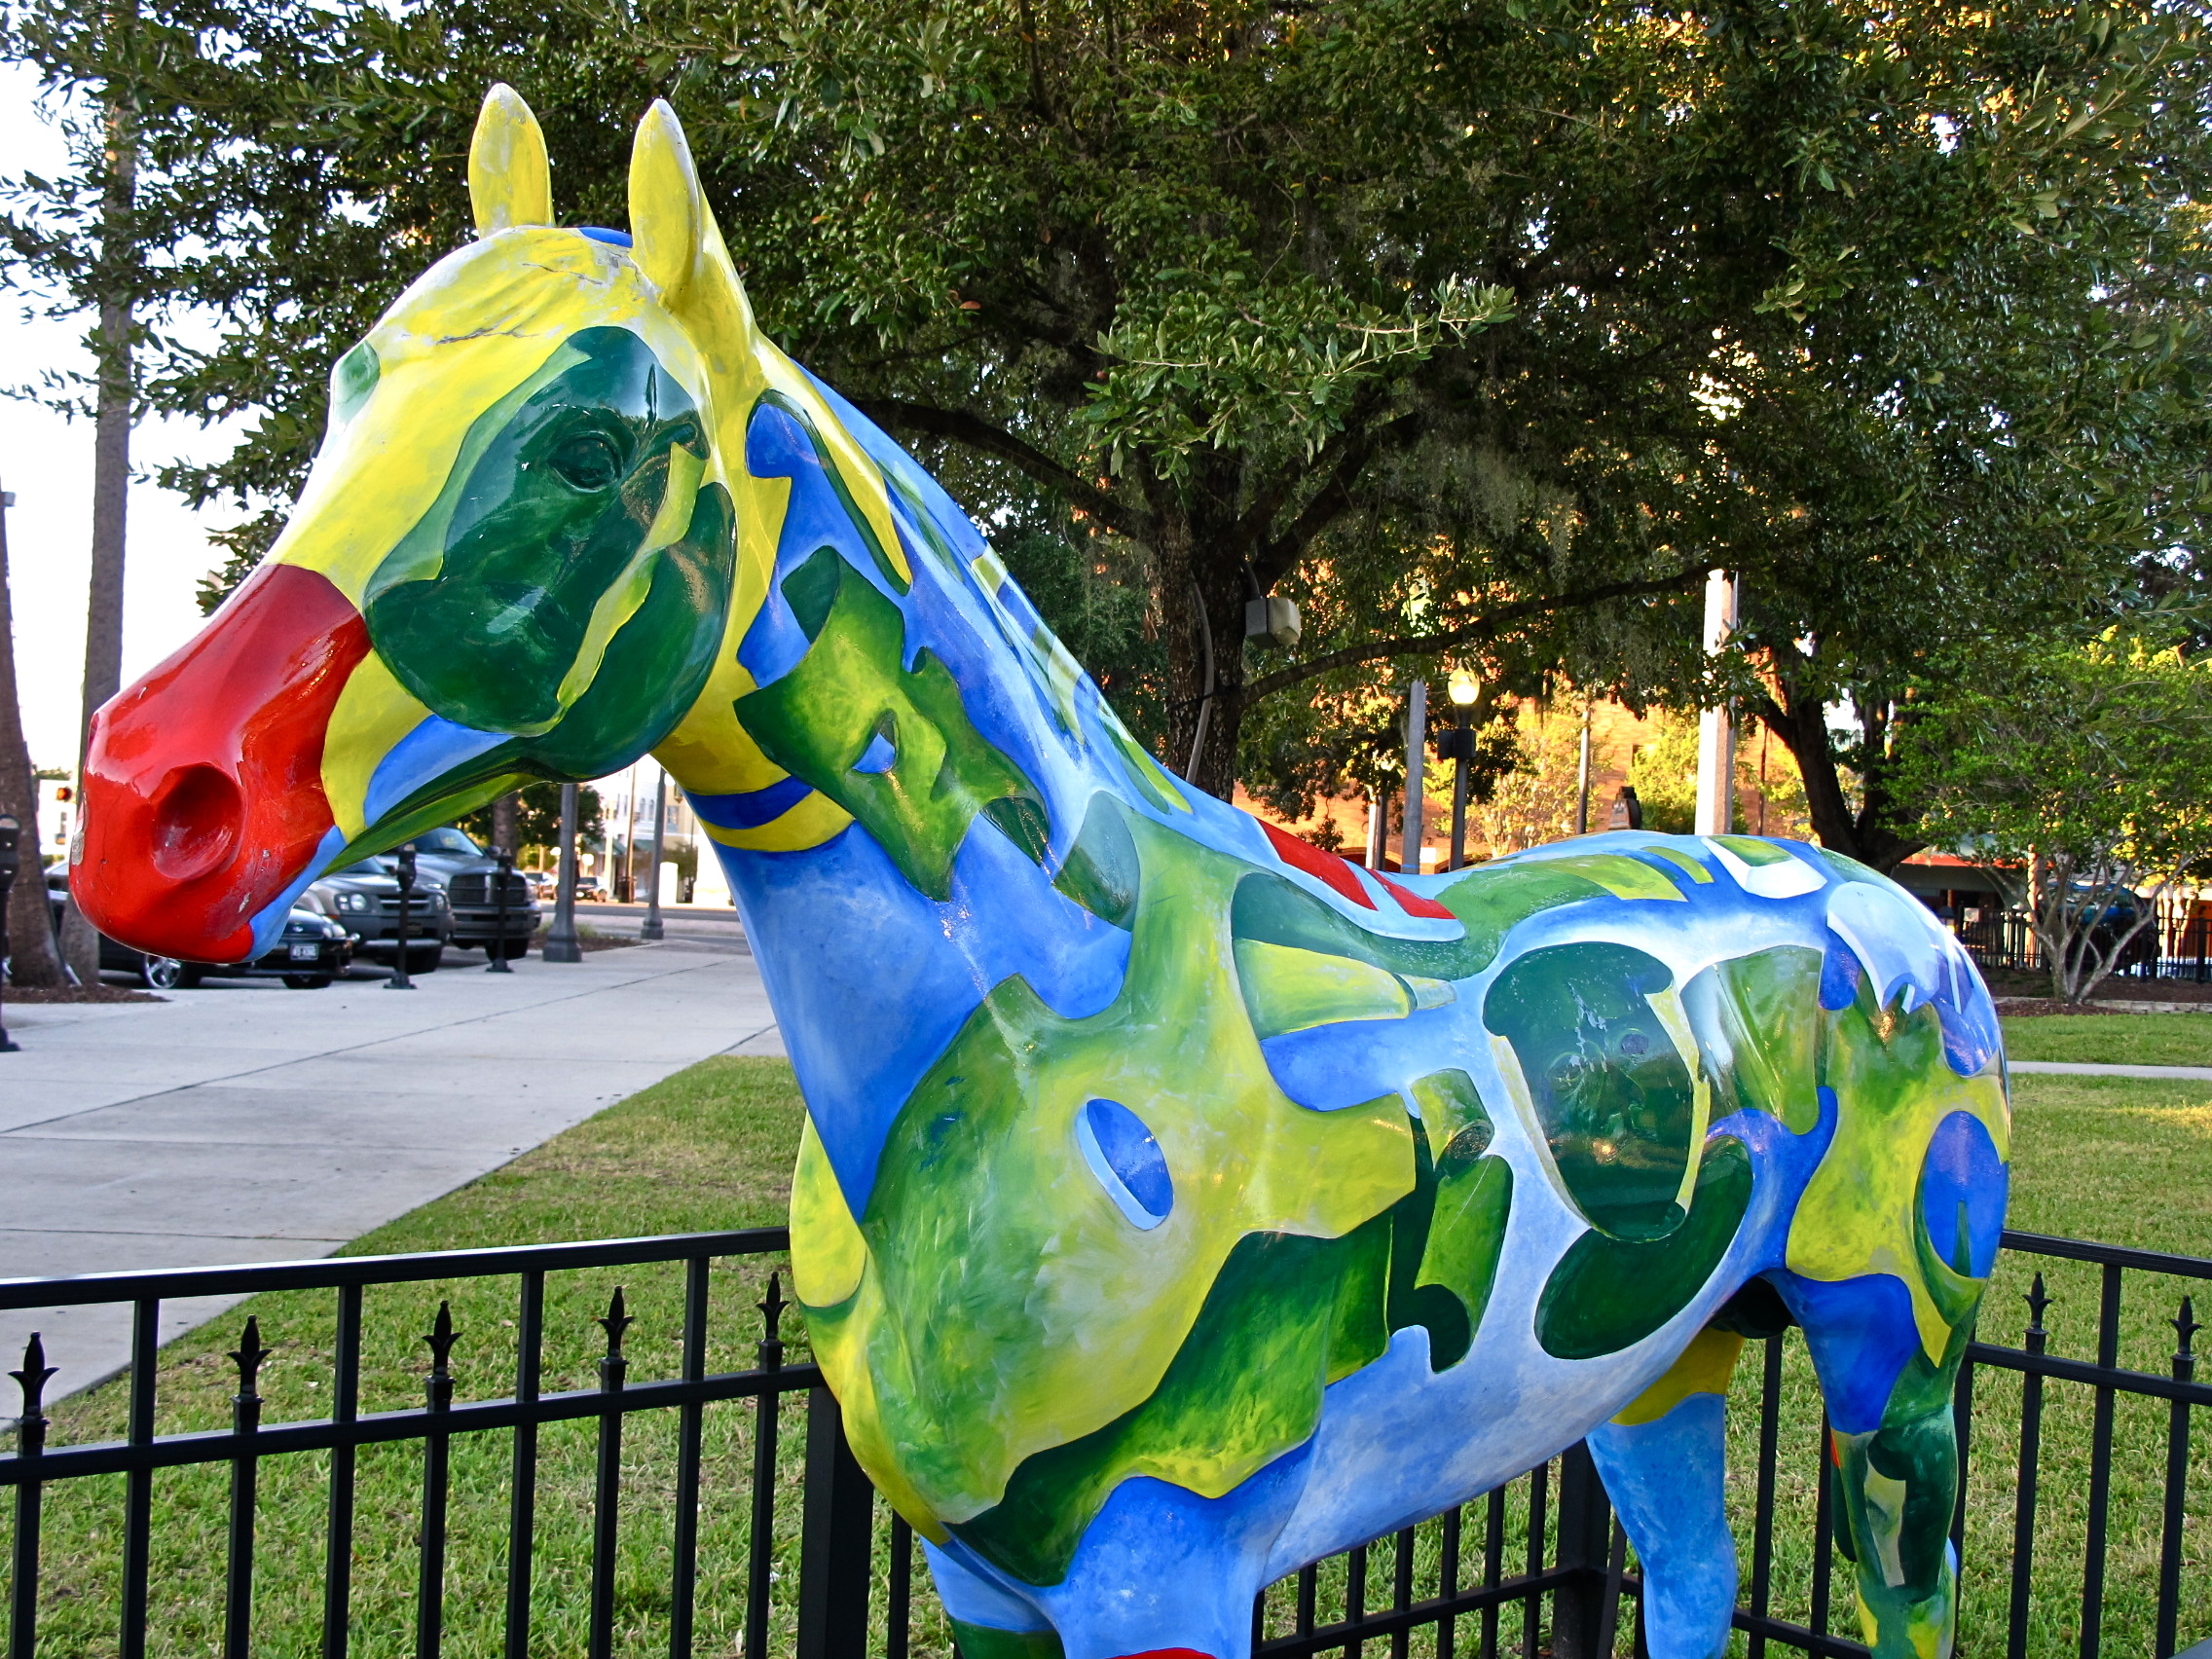 Painted Ponies: An Ocala Community Project “Horse Fever”